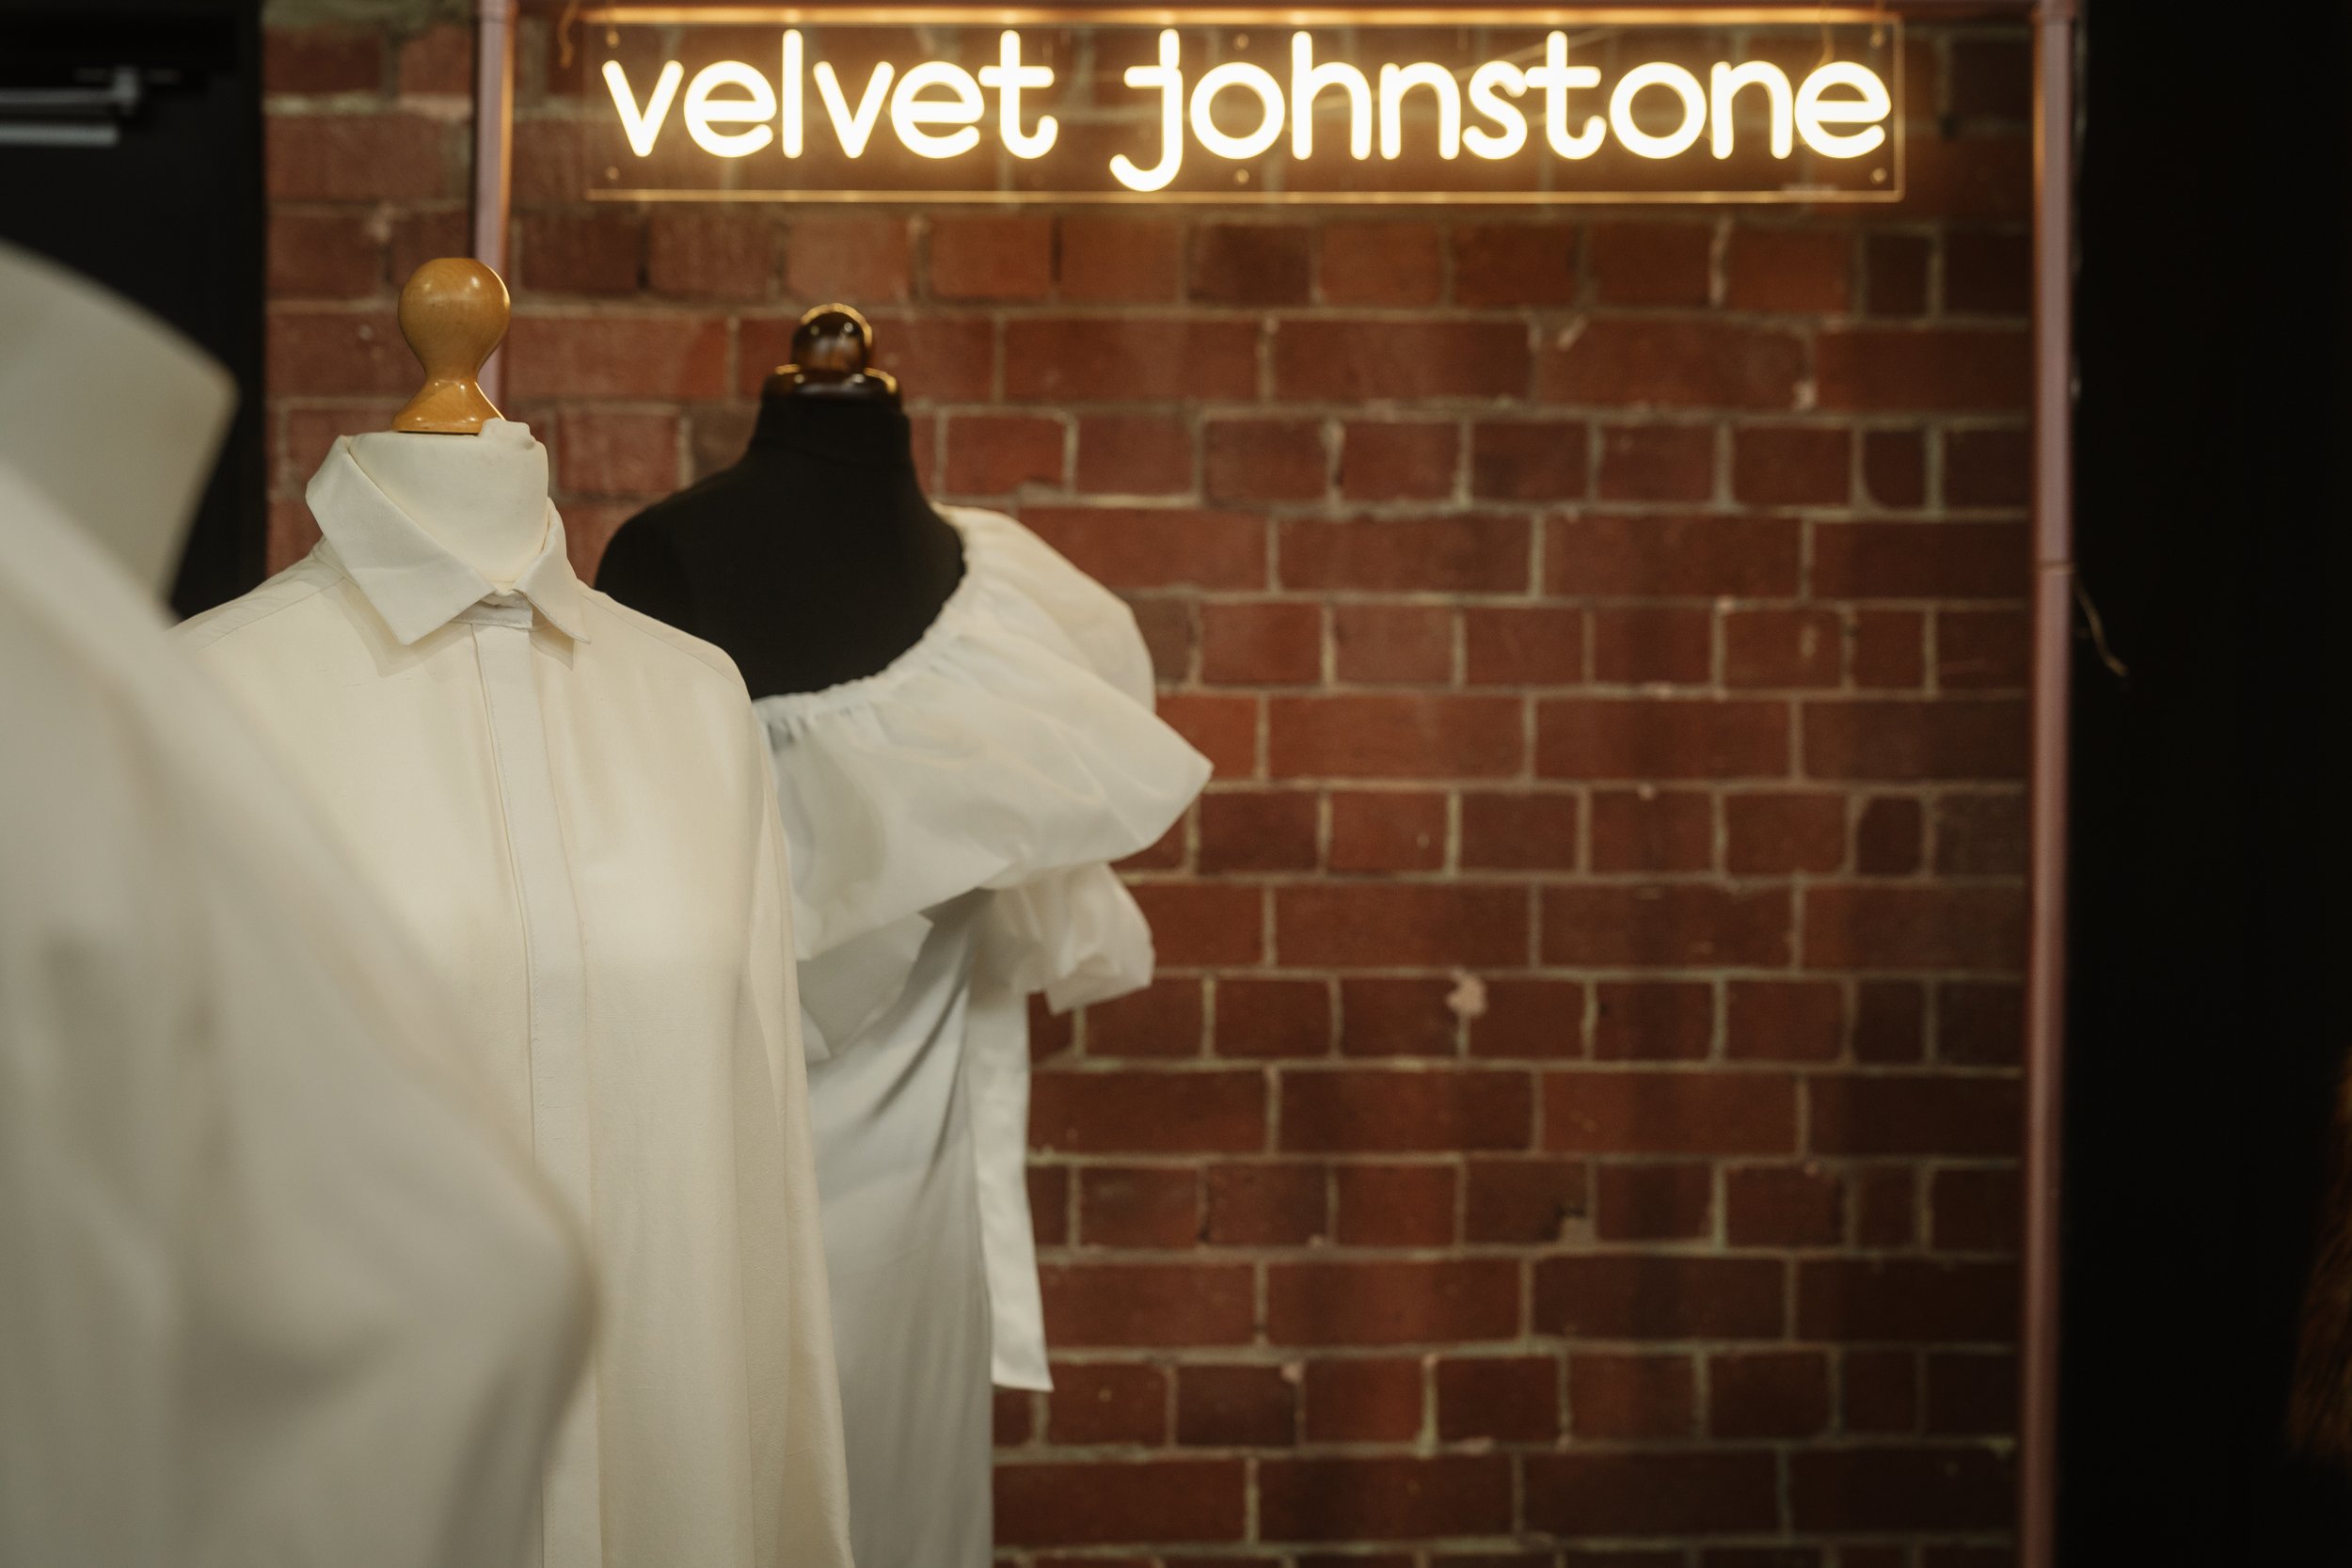  Velvet Johnstone’s stand at TUWS with examples of the bespoke, made to measure wedding dresses and outfits that have been created. 